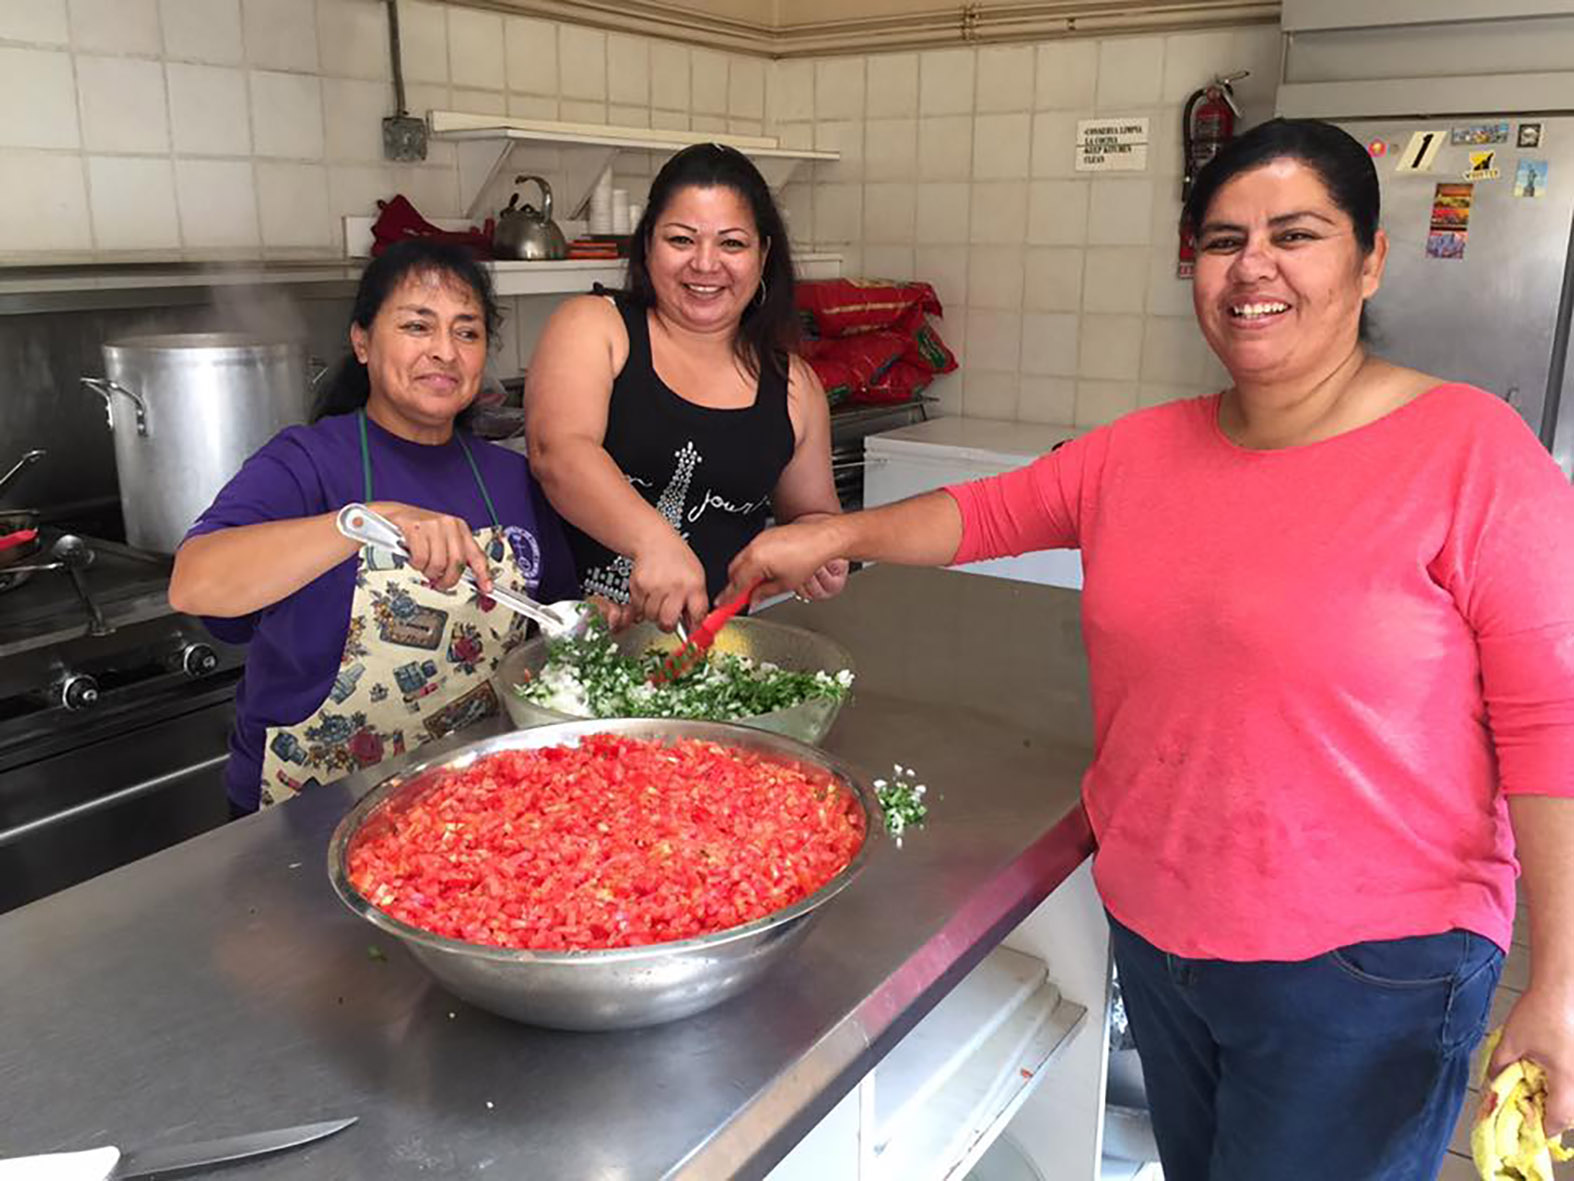 3 women from the community making salsa in the kitchen of la posada